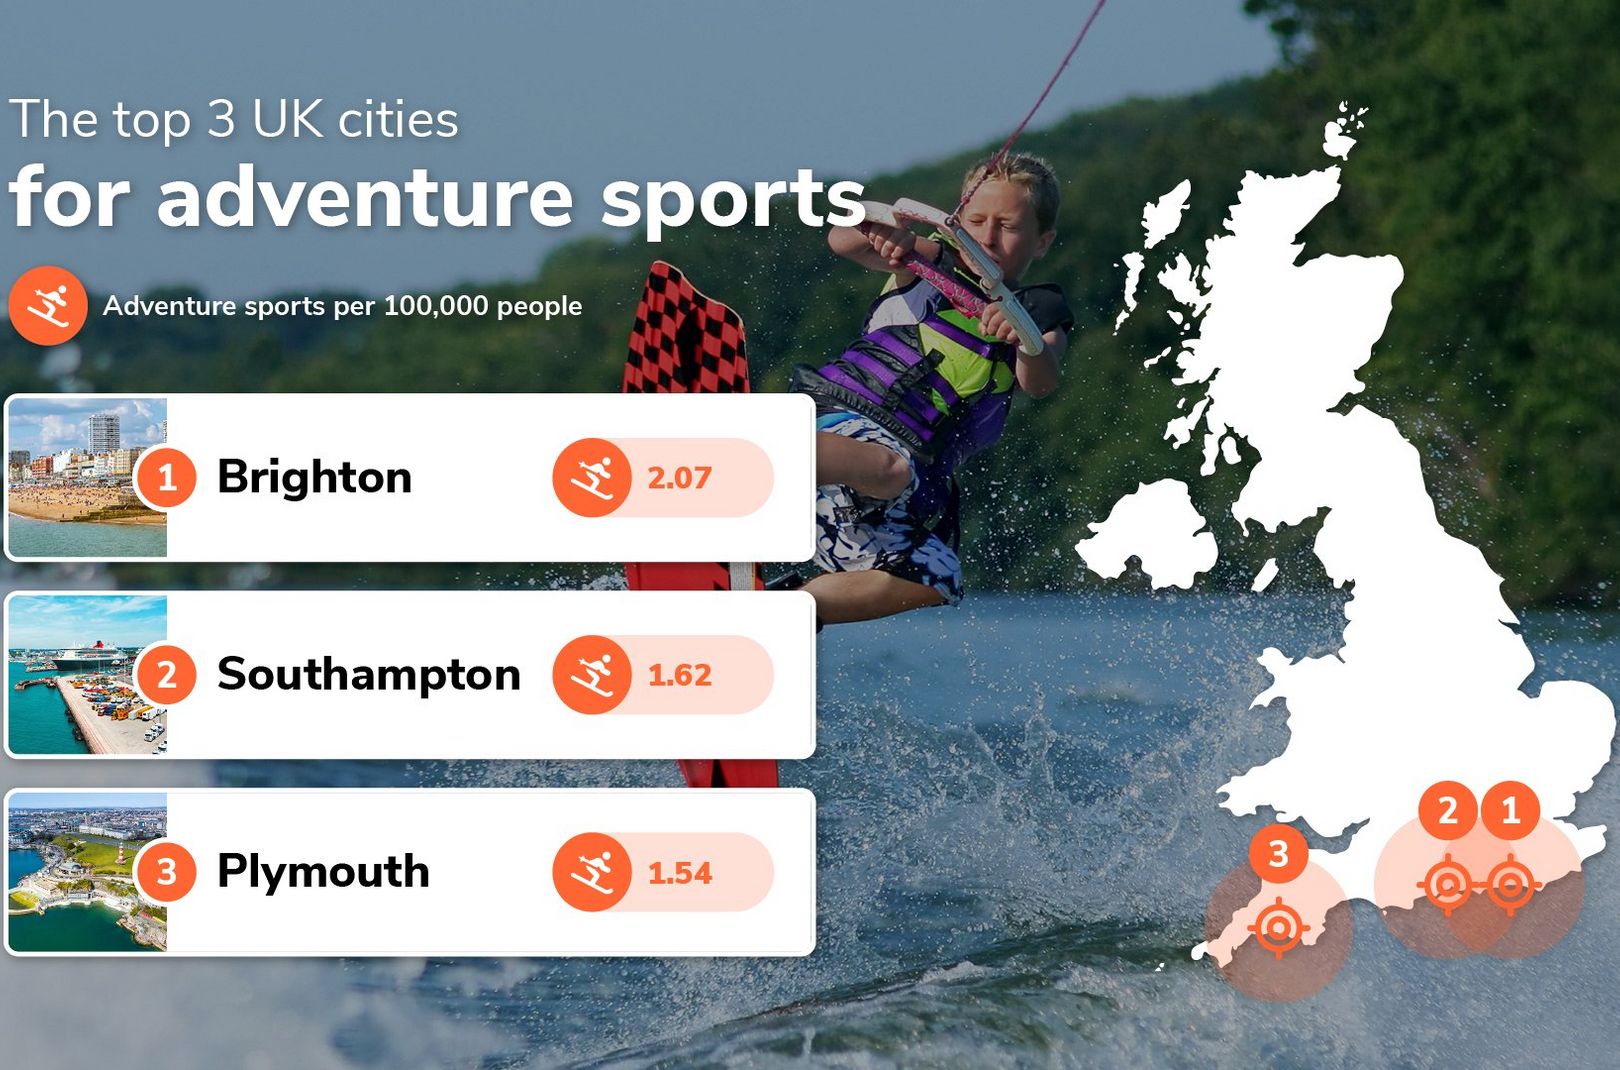 The UK’s top 3 cities for adventure sports